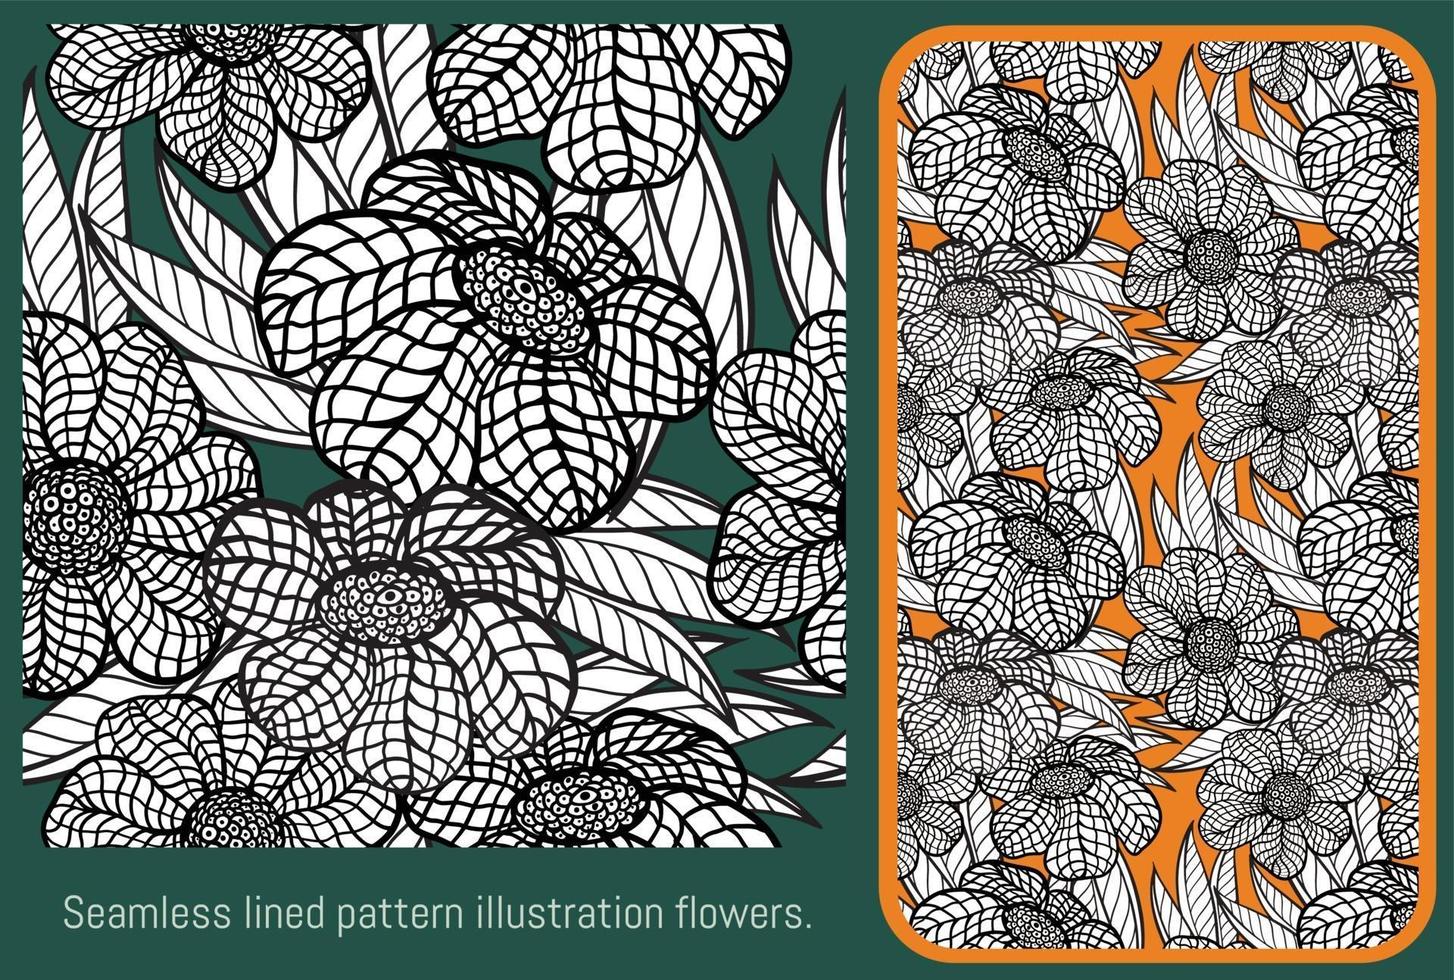 Seamless lined pattern illustration flowers. vector